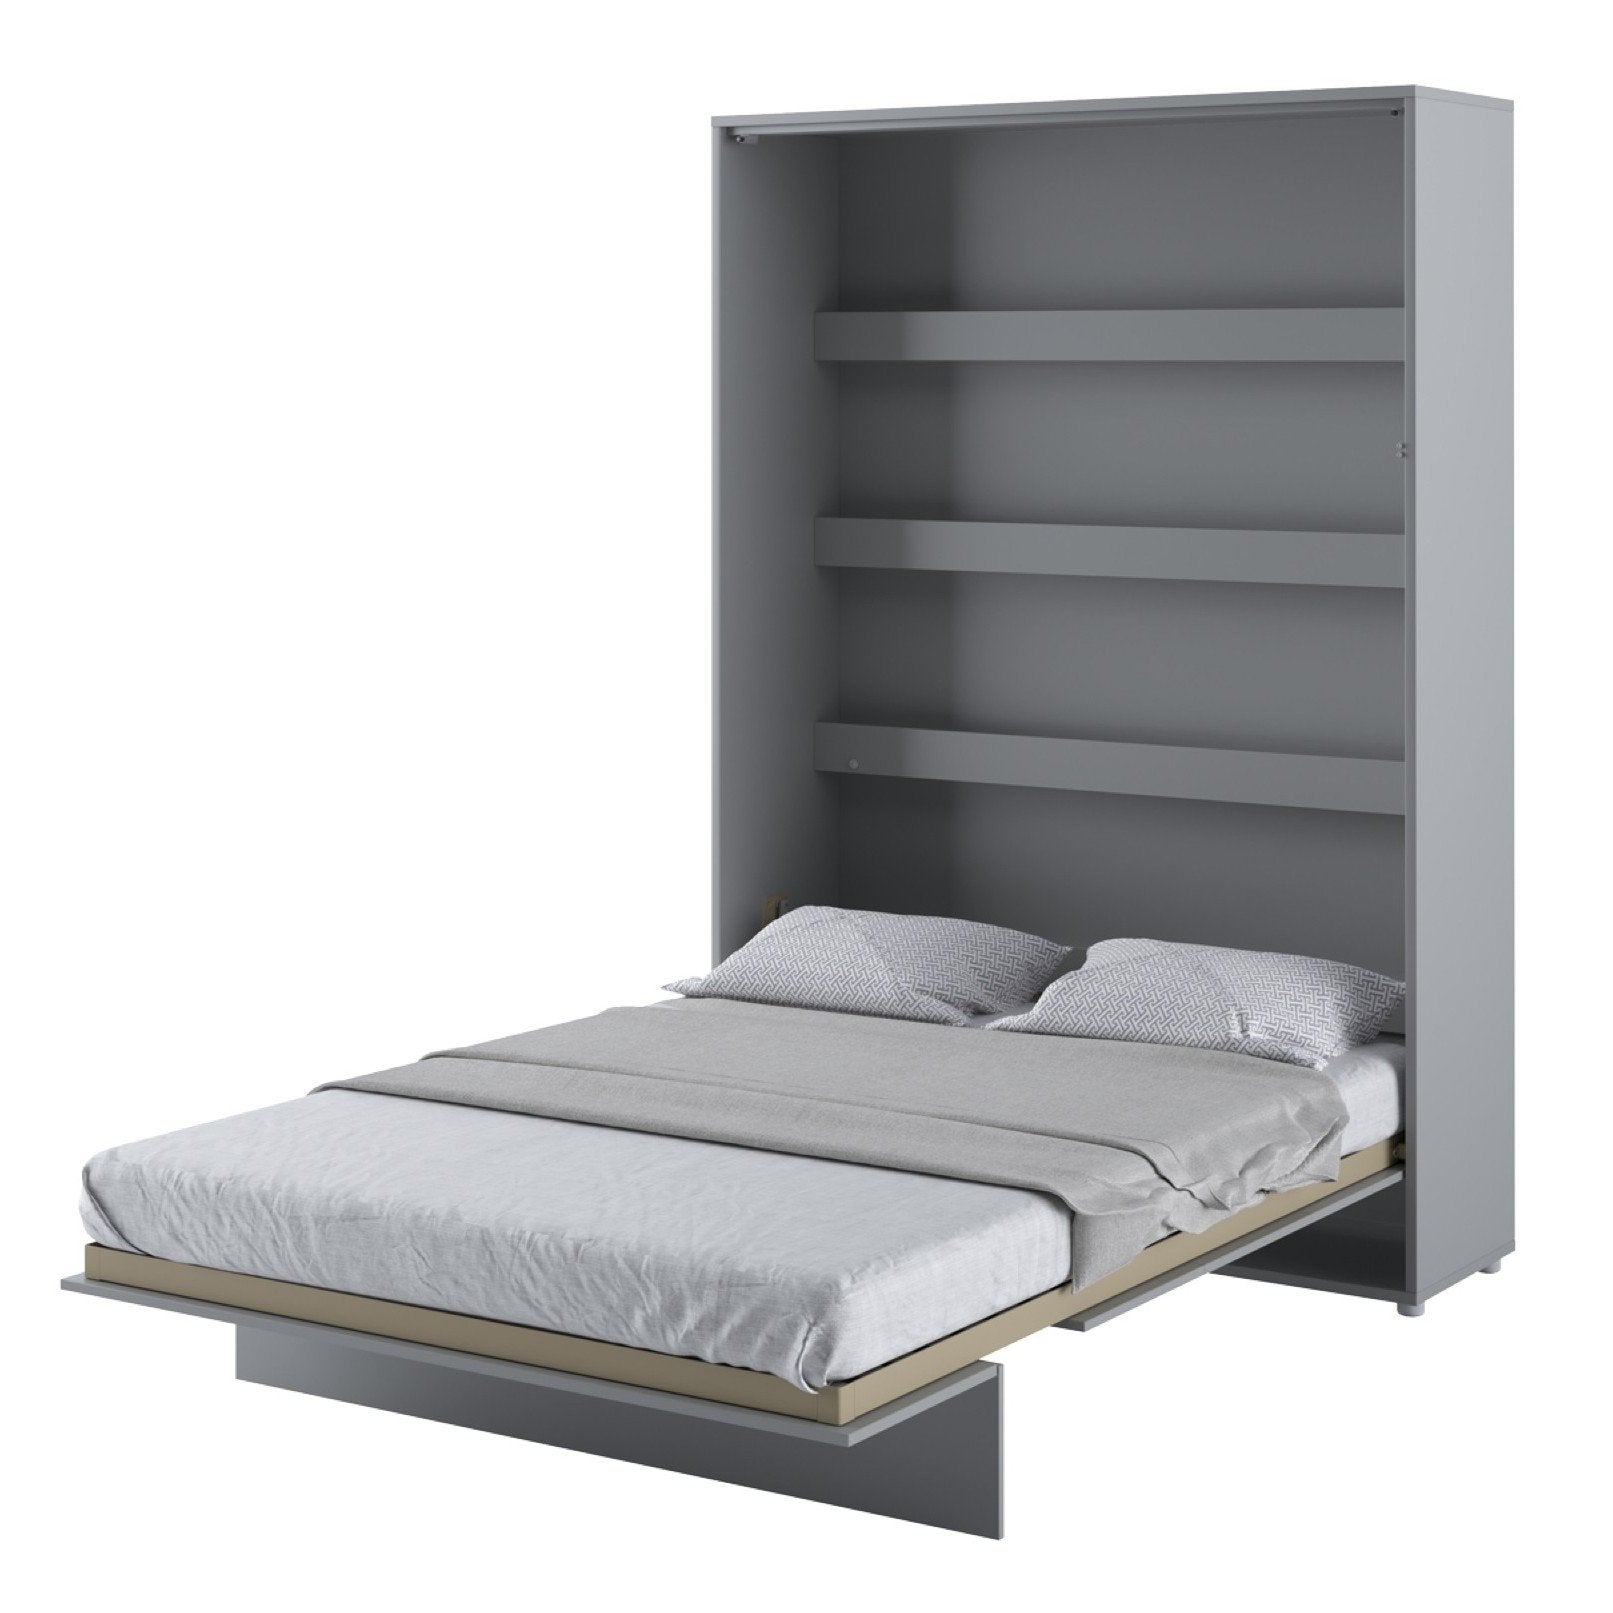 BC-01 Vertical Wall Bed Concept 140cm-Wall Bed